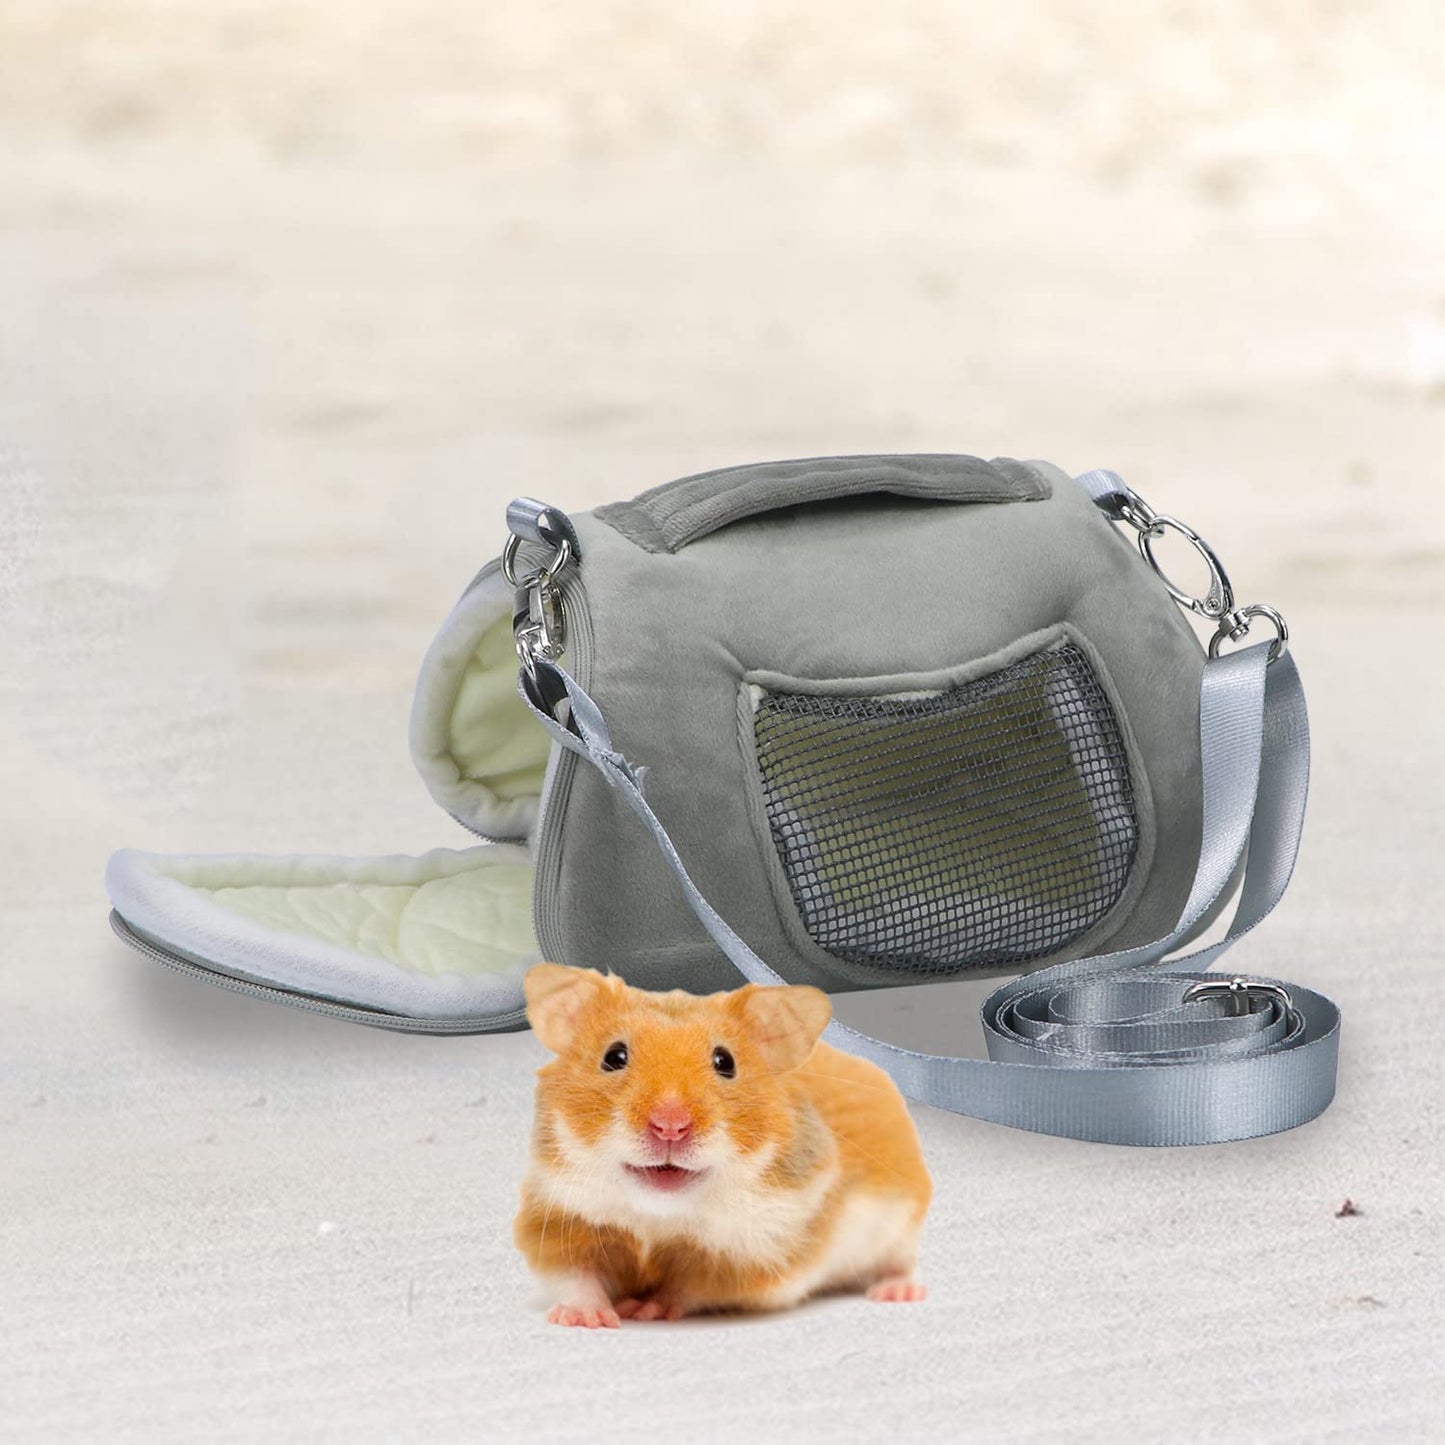 Litewood Pet Portable Carrier Bags Outgoing Breathable Handbag with Adjustable Single Shoulder Strap Travel Pouch Warm Nest Accessories for Sugar Glider Hamster Squirrel Small Animals (Grey) - Hatke